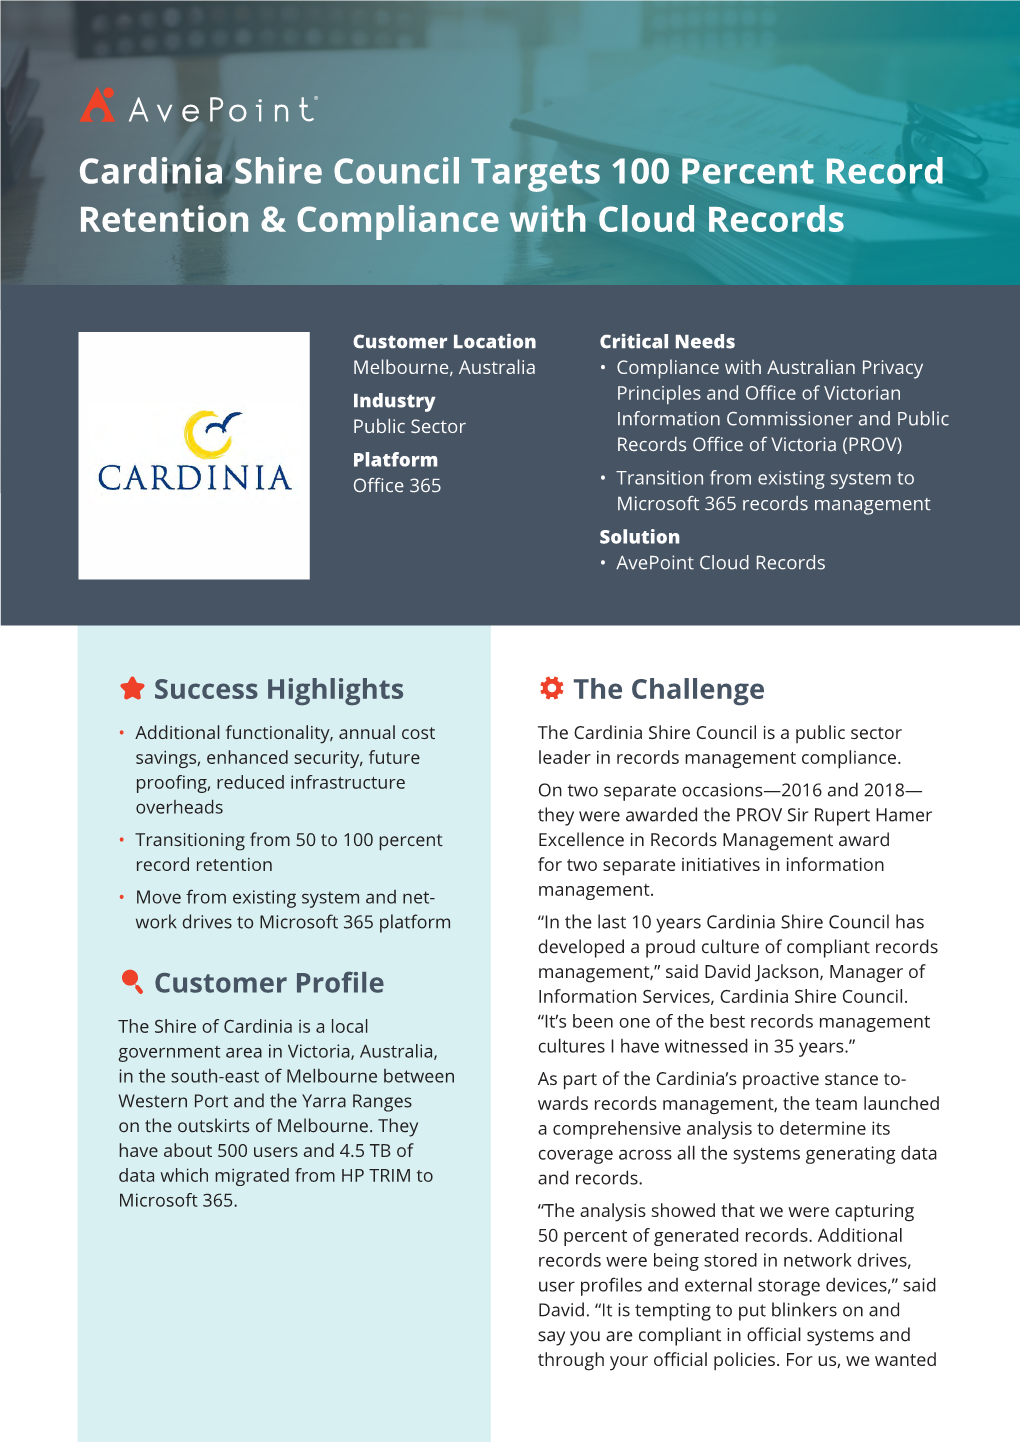 Cardinia Shire Council Targets 100 Percent Record Retention & Compliance with Cloud Records